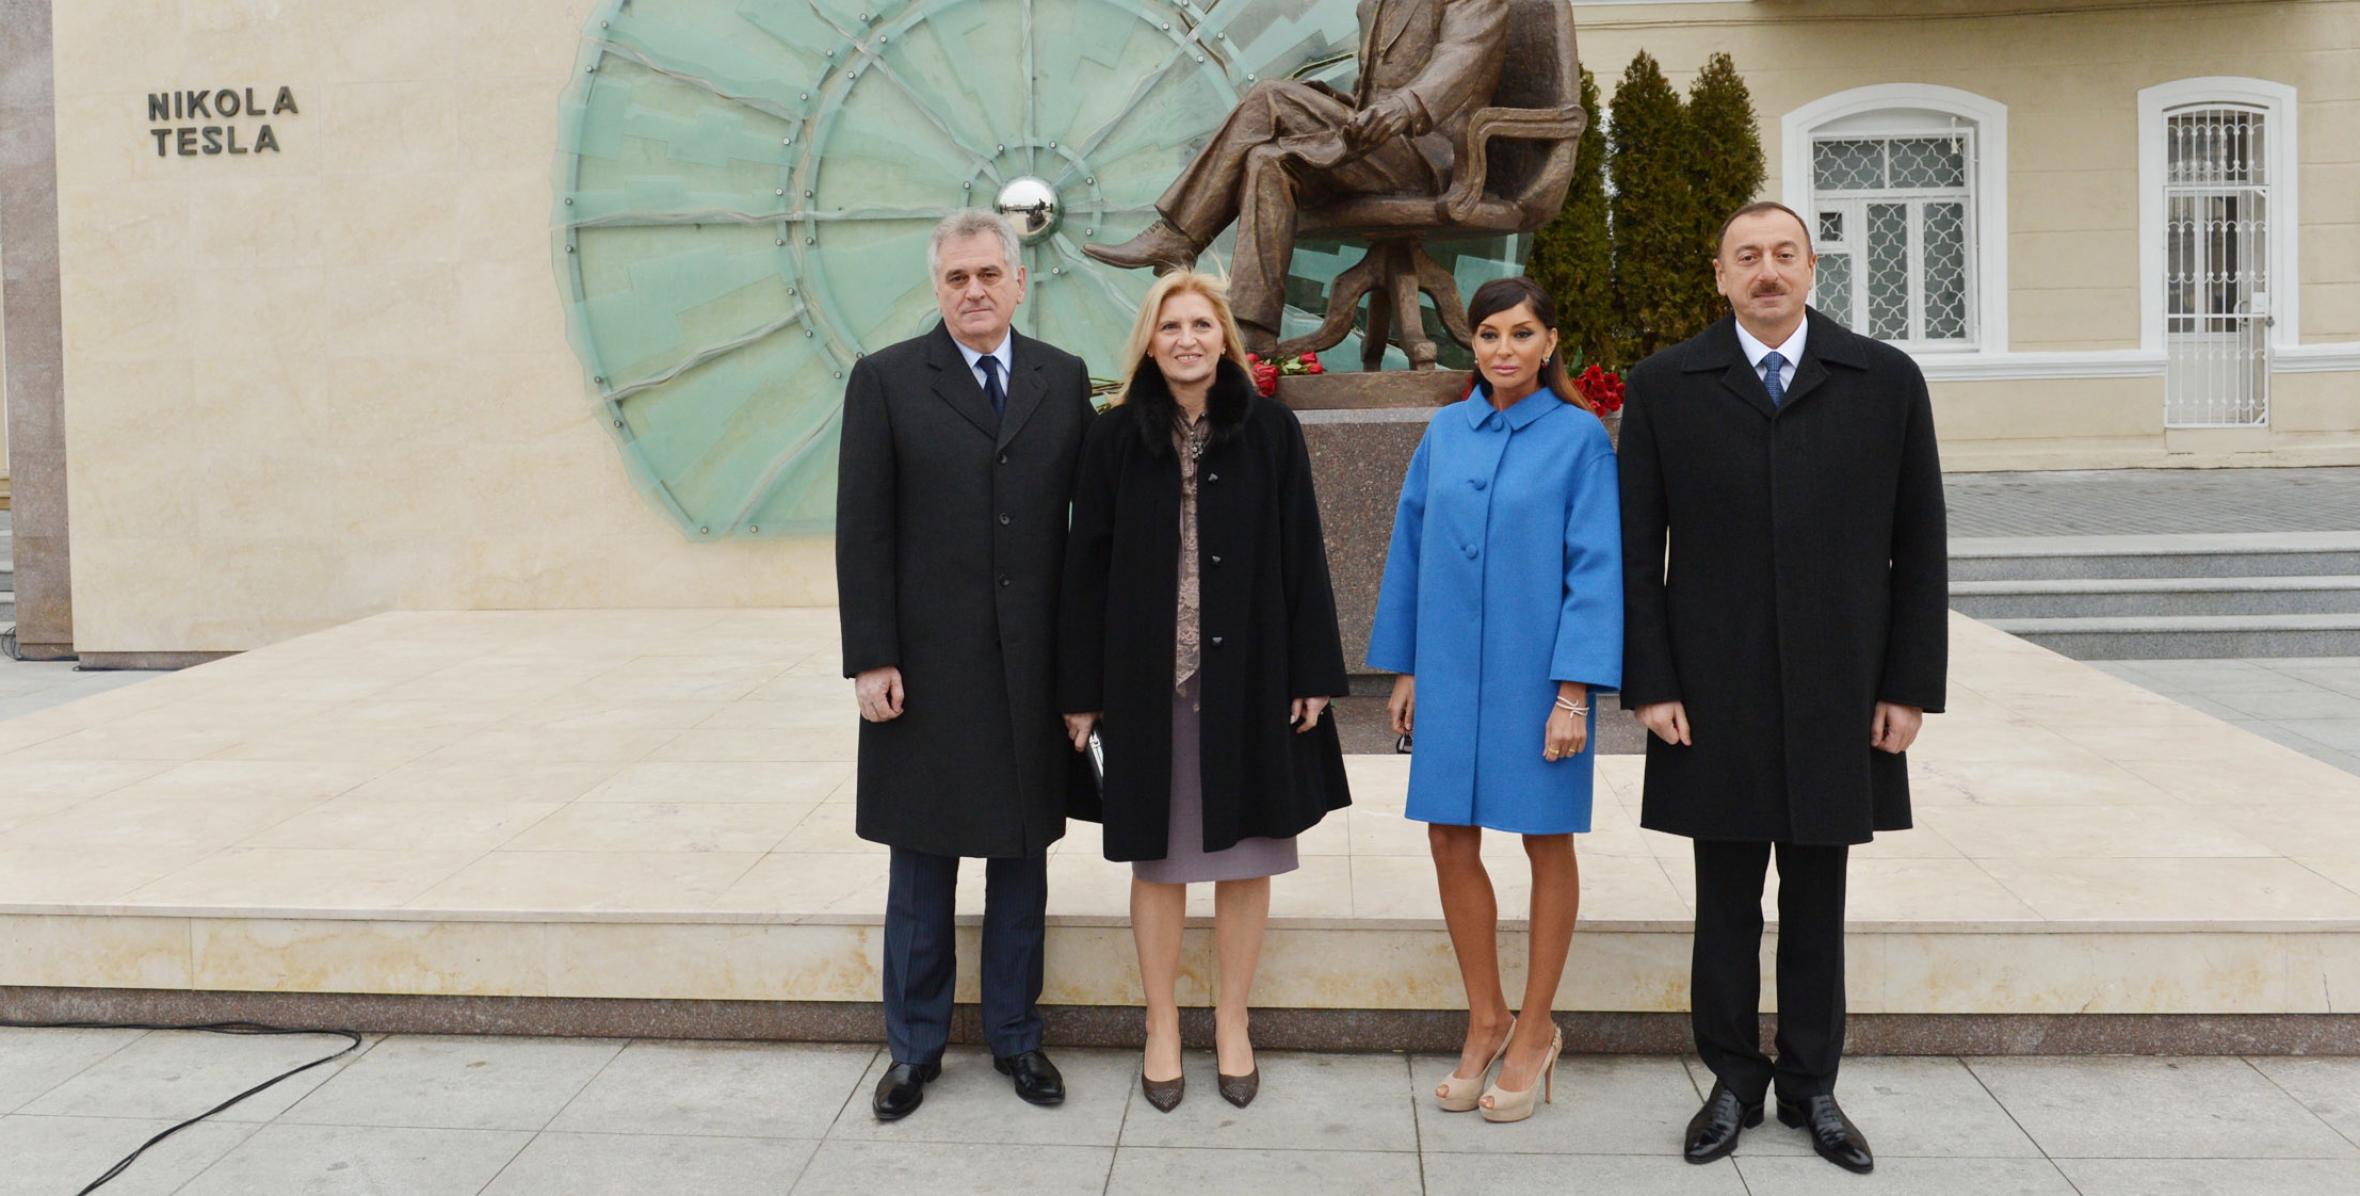 Ilham Aliyev and President of the Republic of Serbia Tomislav Nikolic attended a ceremony to unveil a monument to outstanding Serbian scientist Nikola Tesla